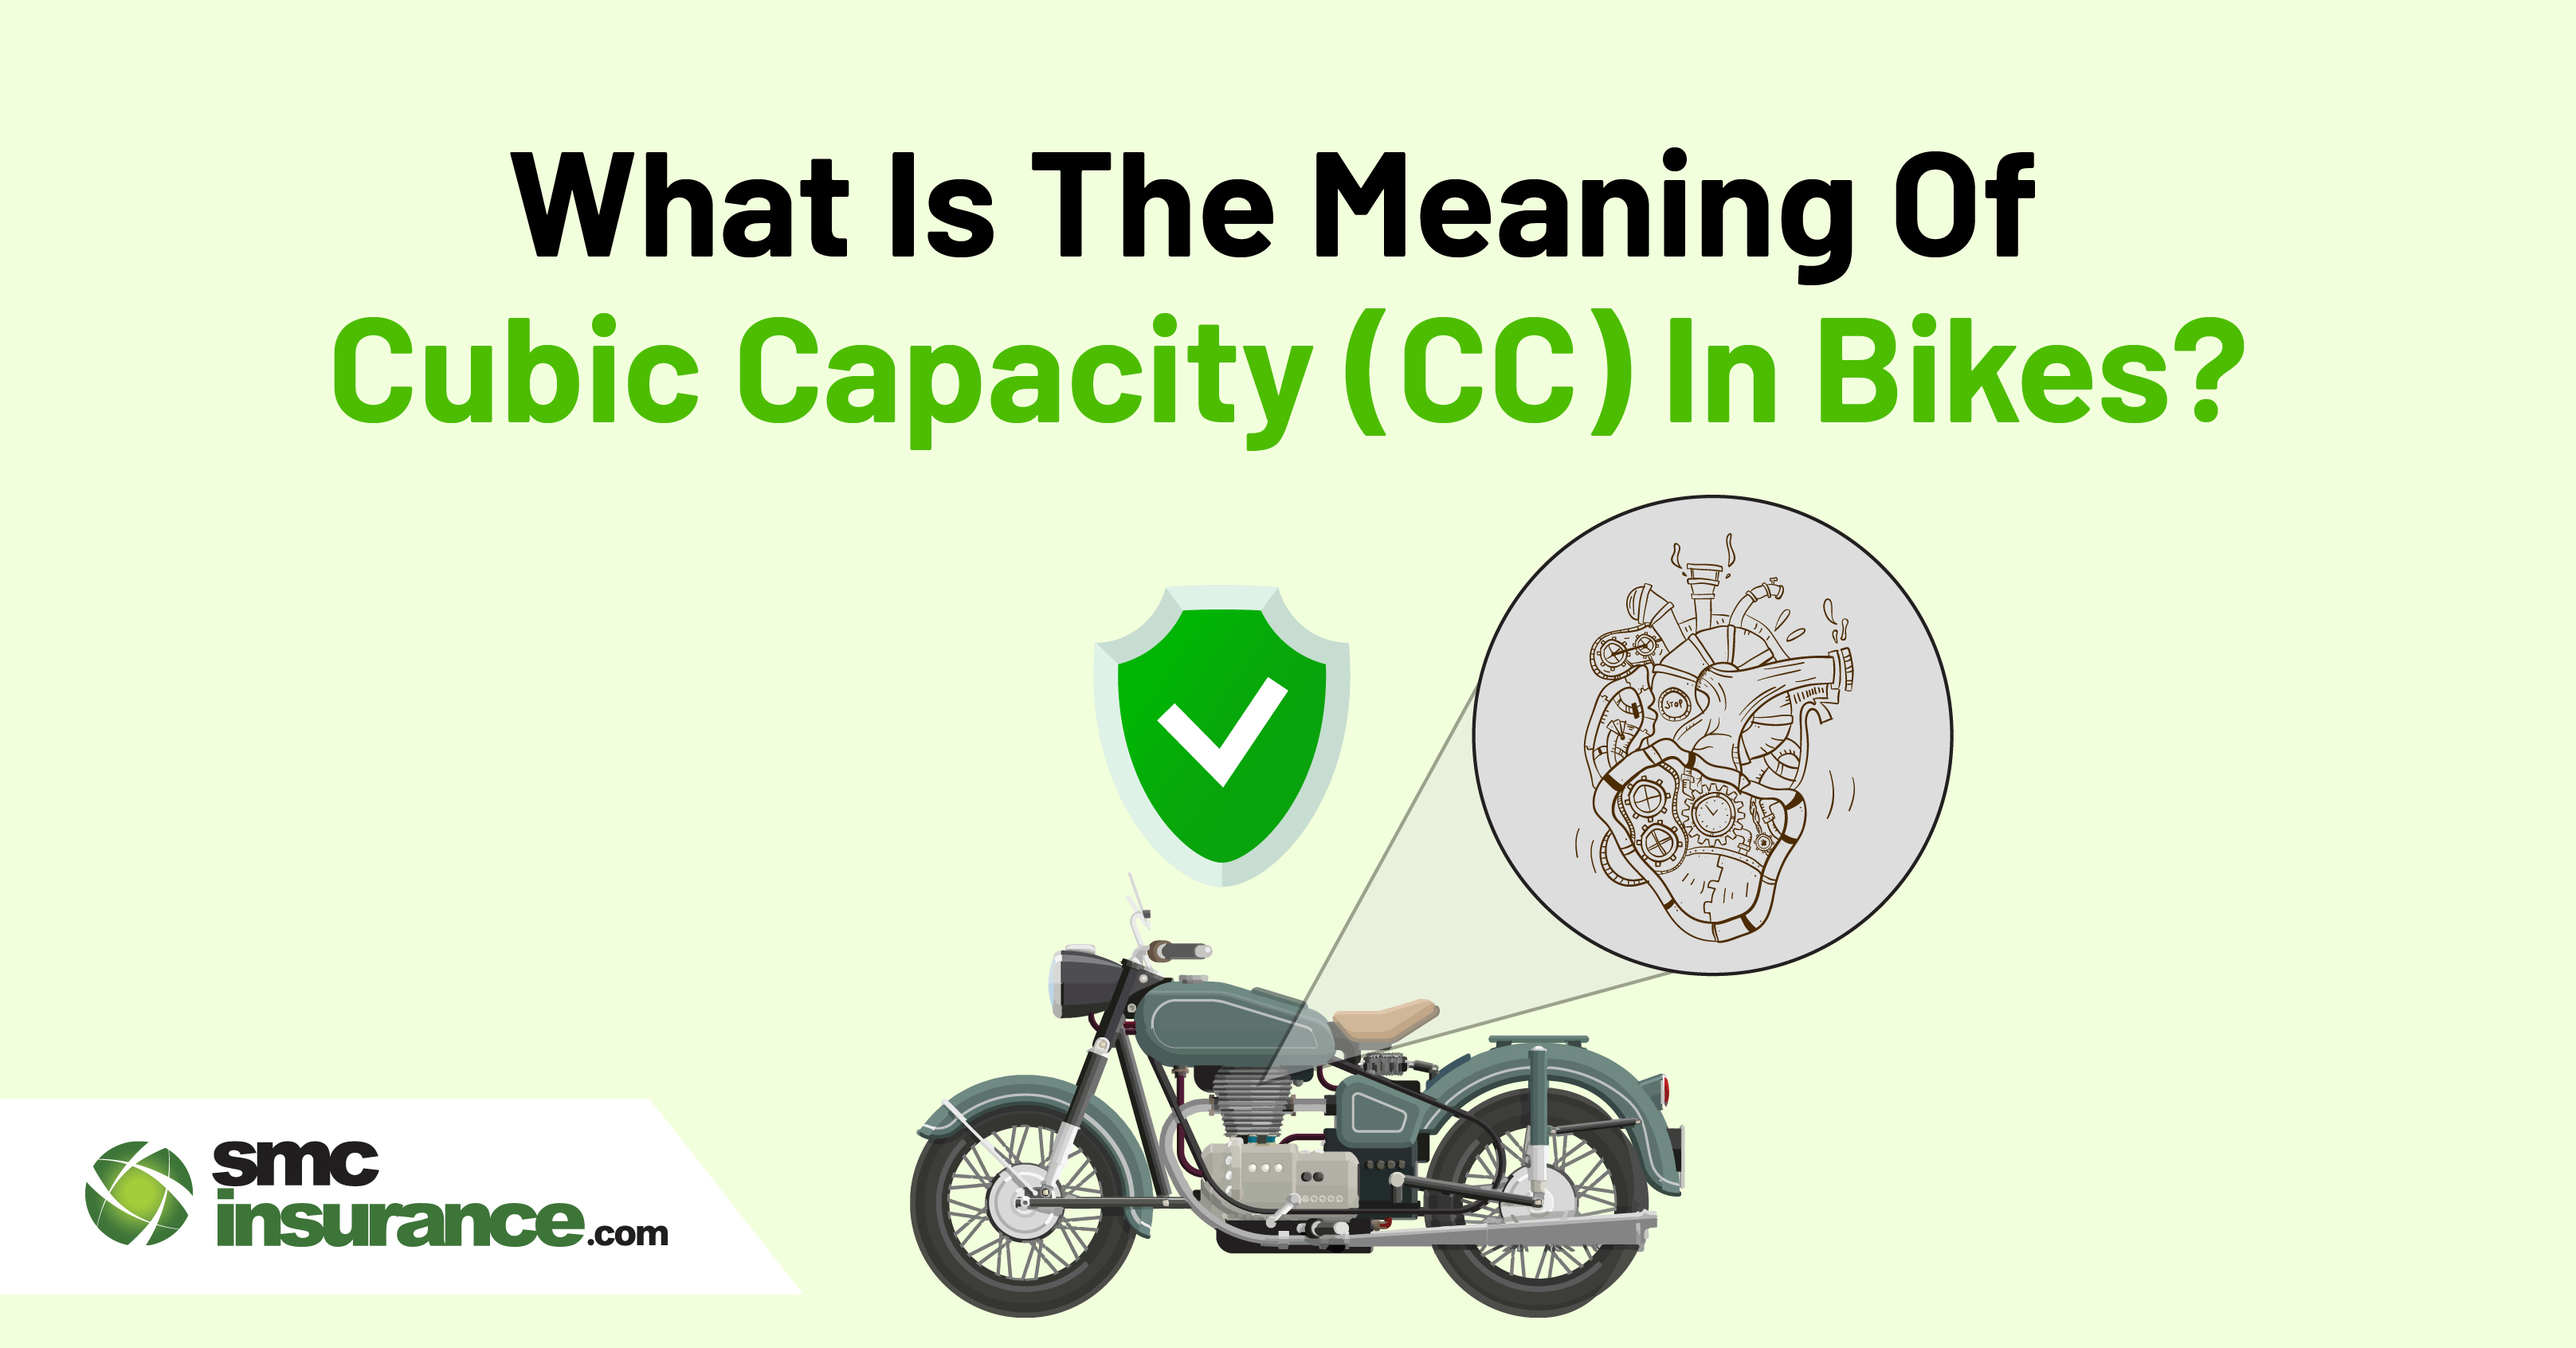 What Is The Significance Of Cubic Capacity (CC) In Bikes?